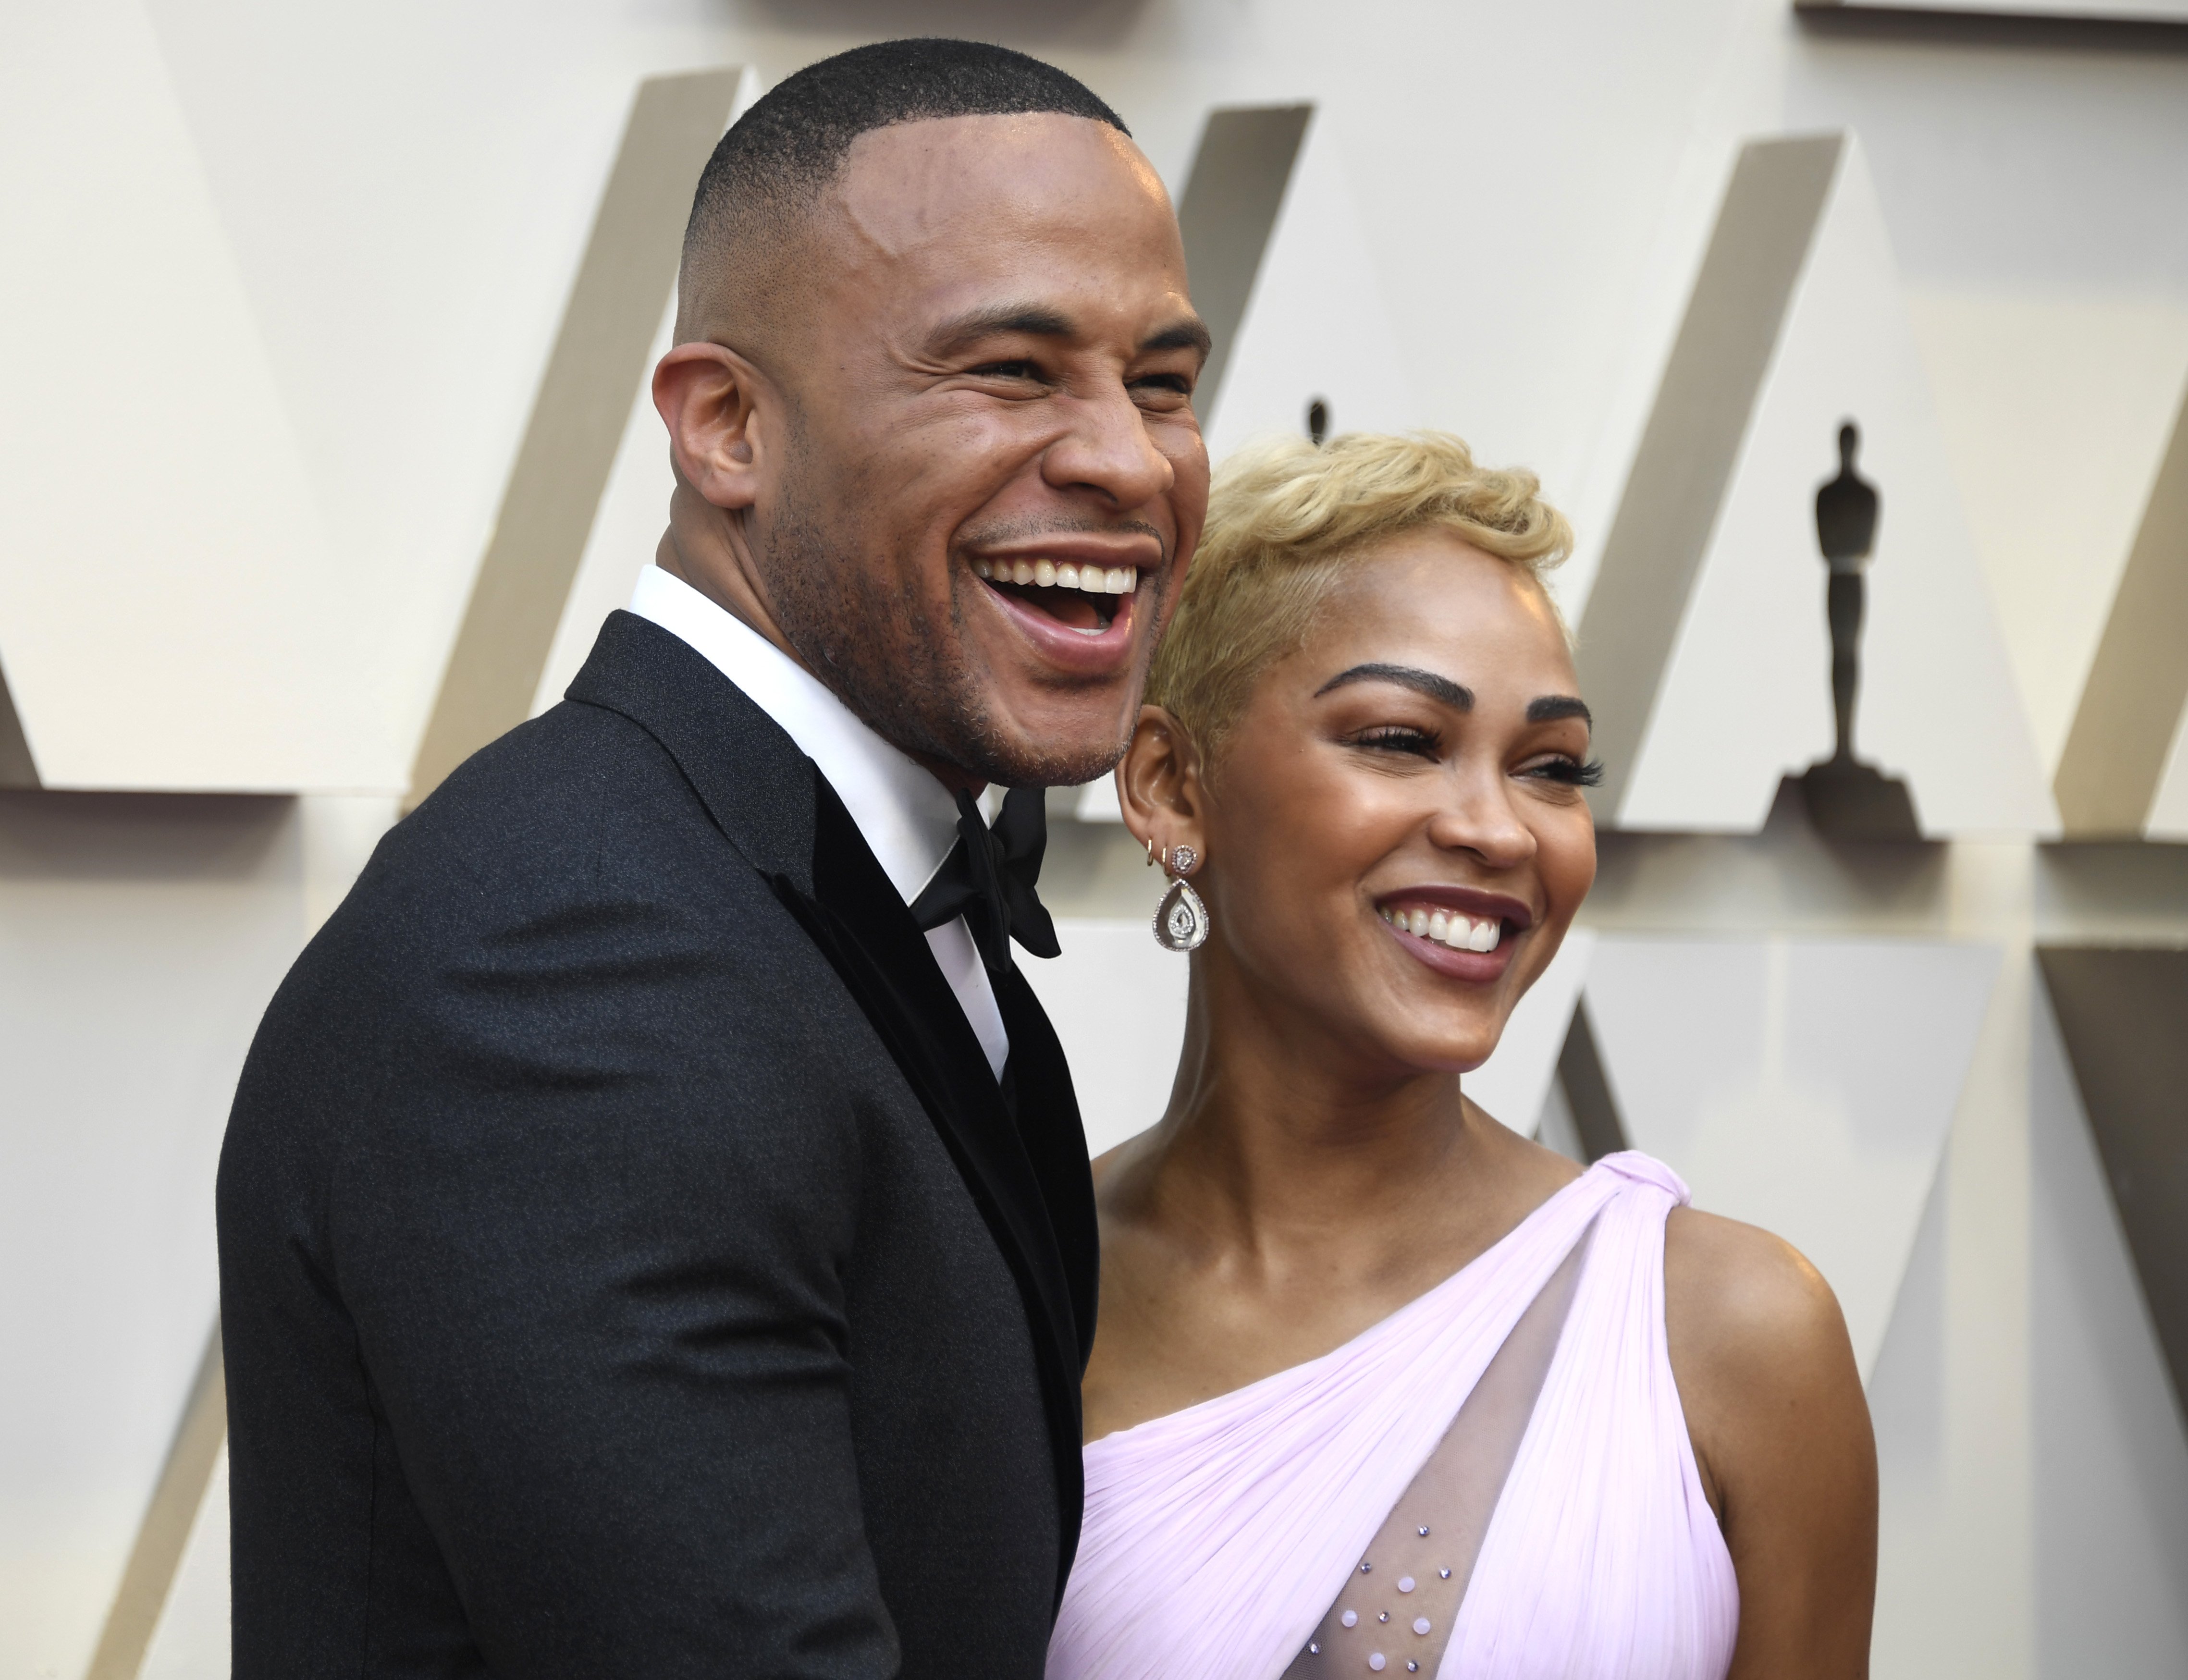 DeVon Franklin and Meagan Good attend the 91st Annual Academy Awards at Hollywood and Highland on February 24, 2019 | Photo: GettyImages